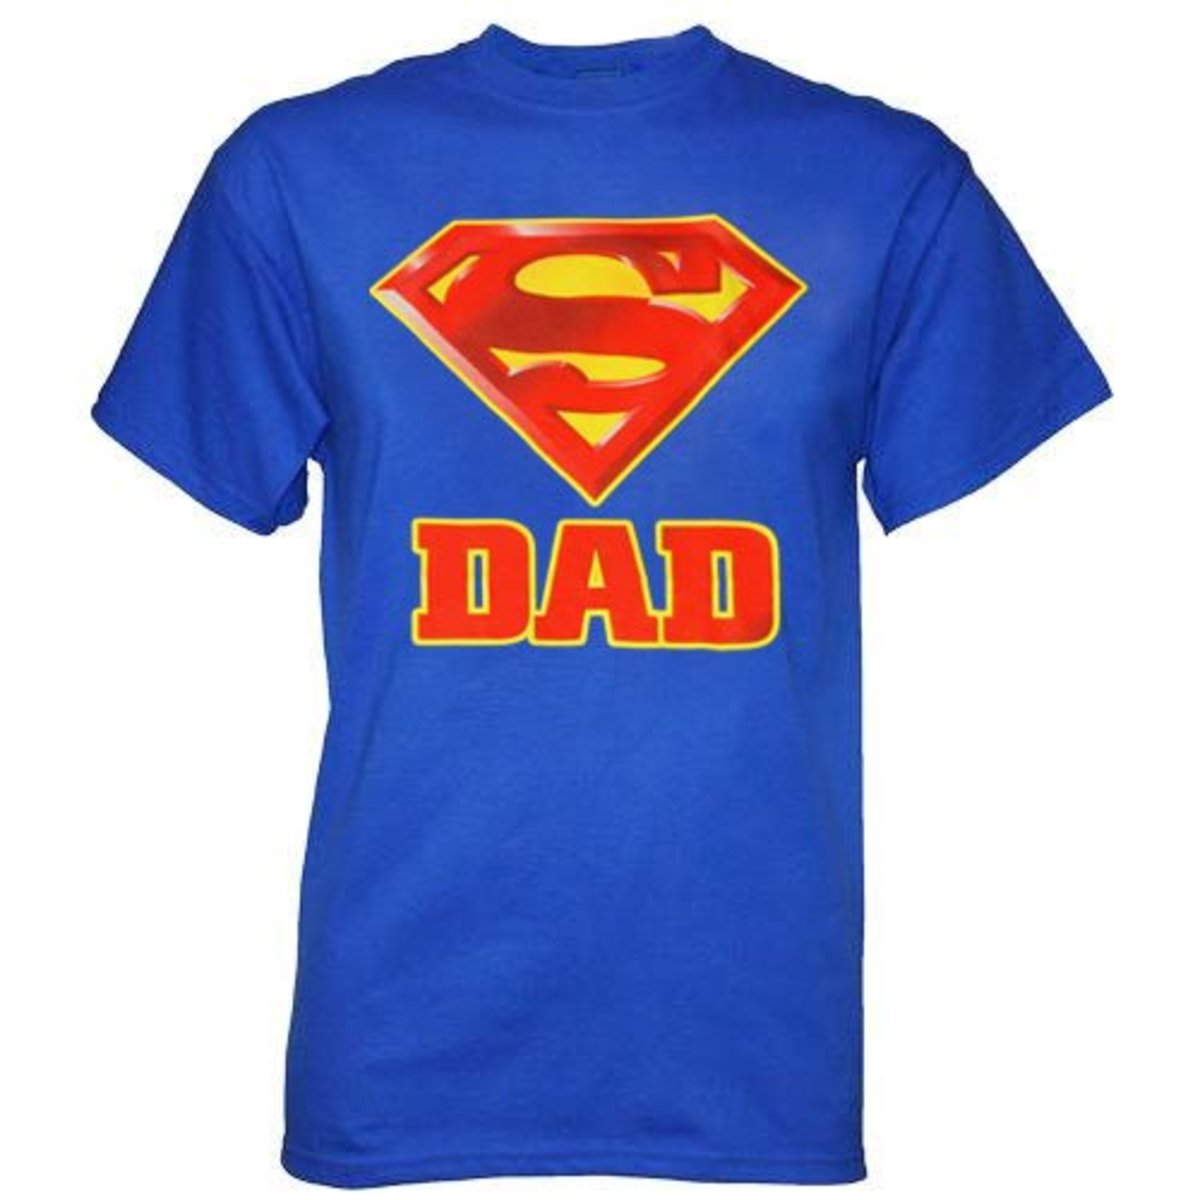 FATHER'S DAY MESSAGES | Father's Day Pics & Funny Father's Day Cards ...